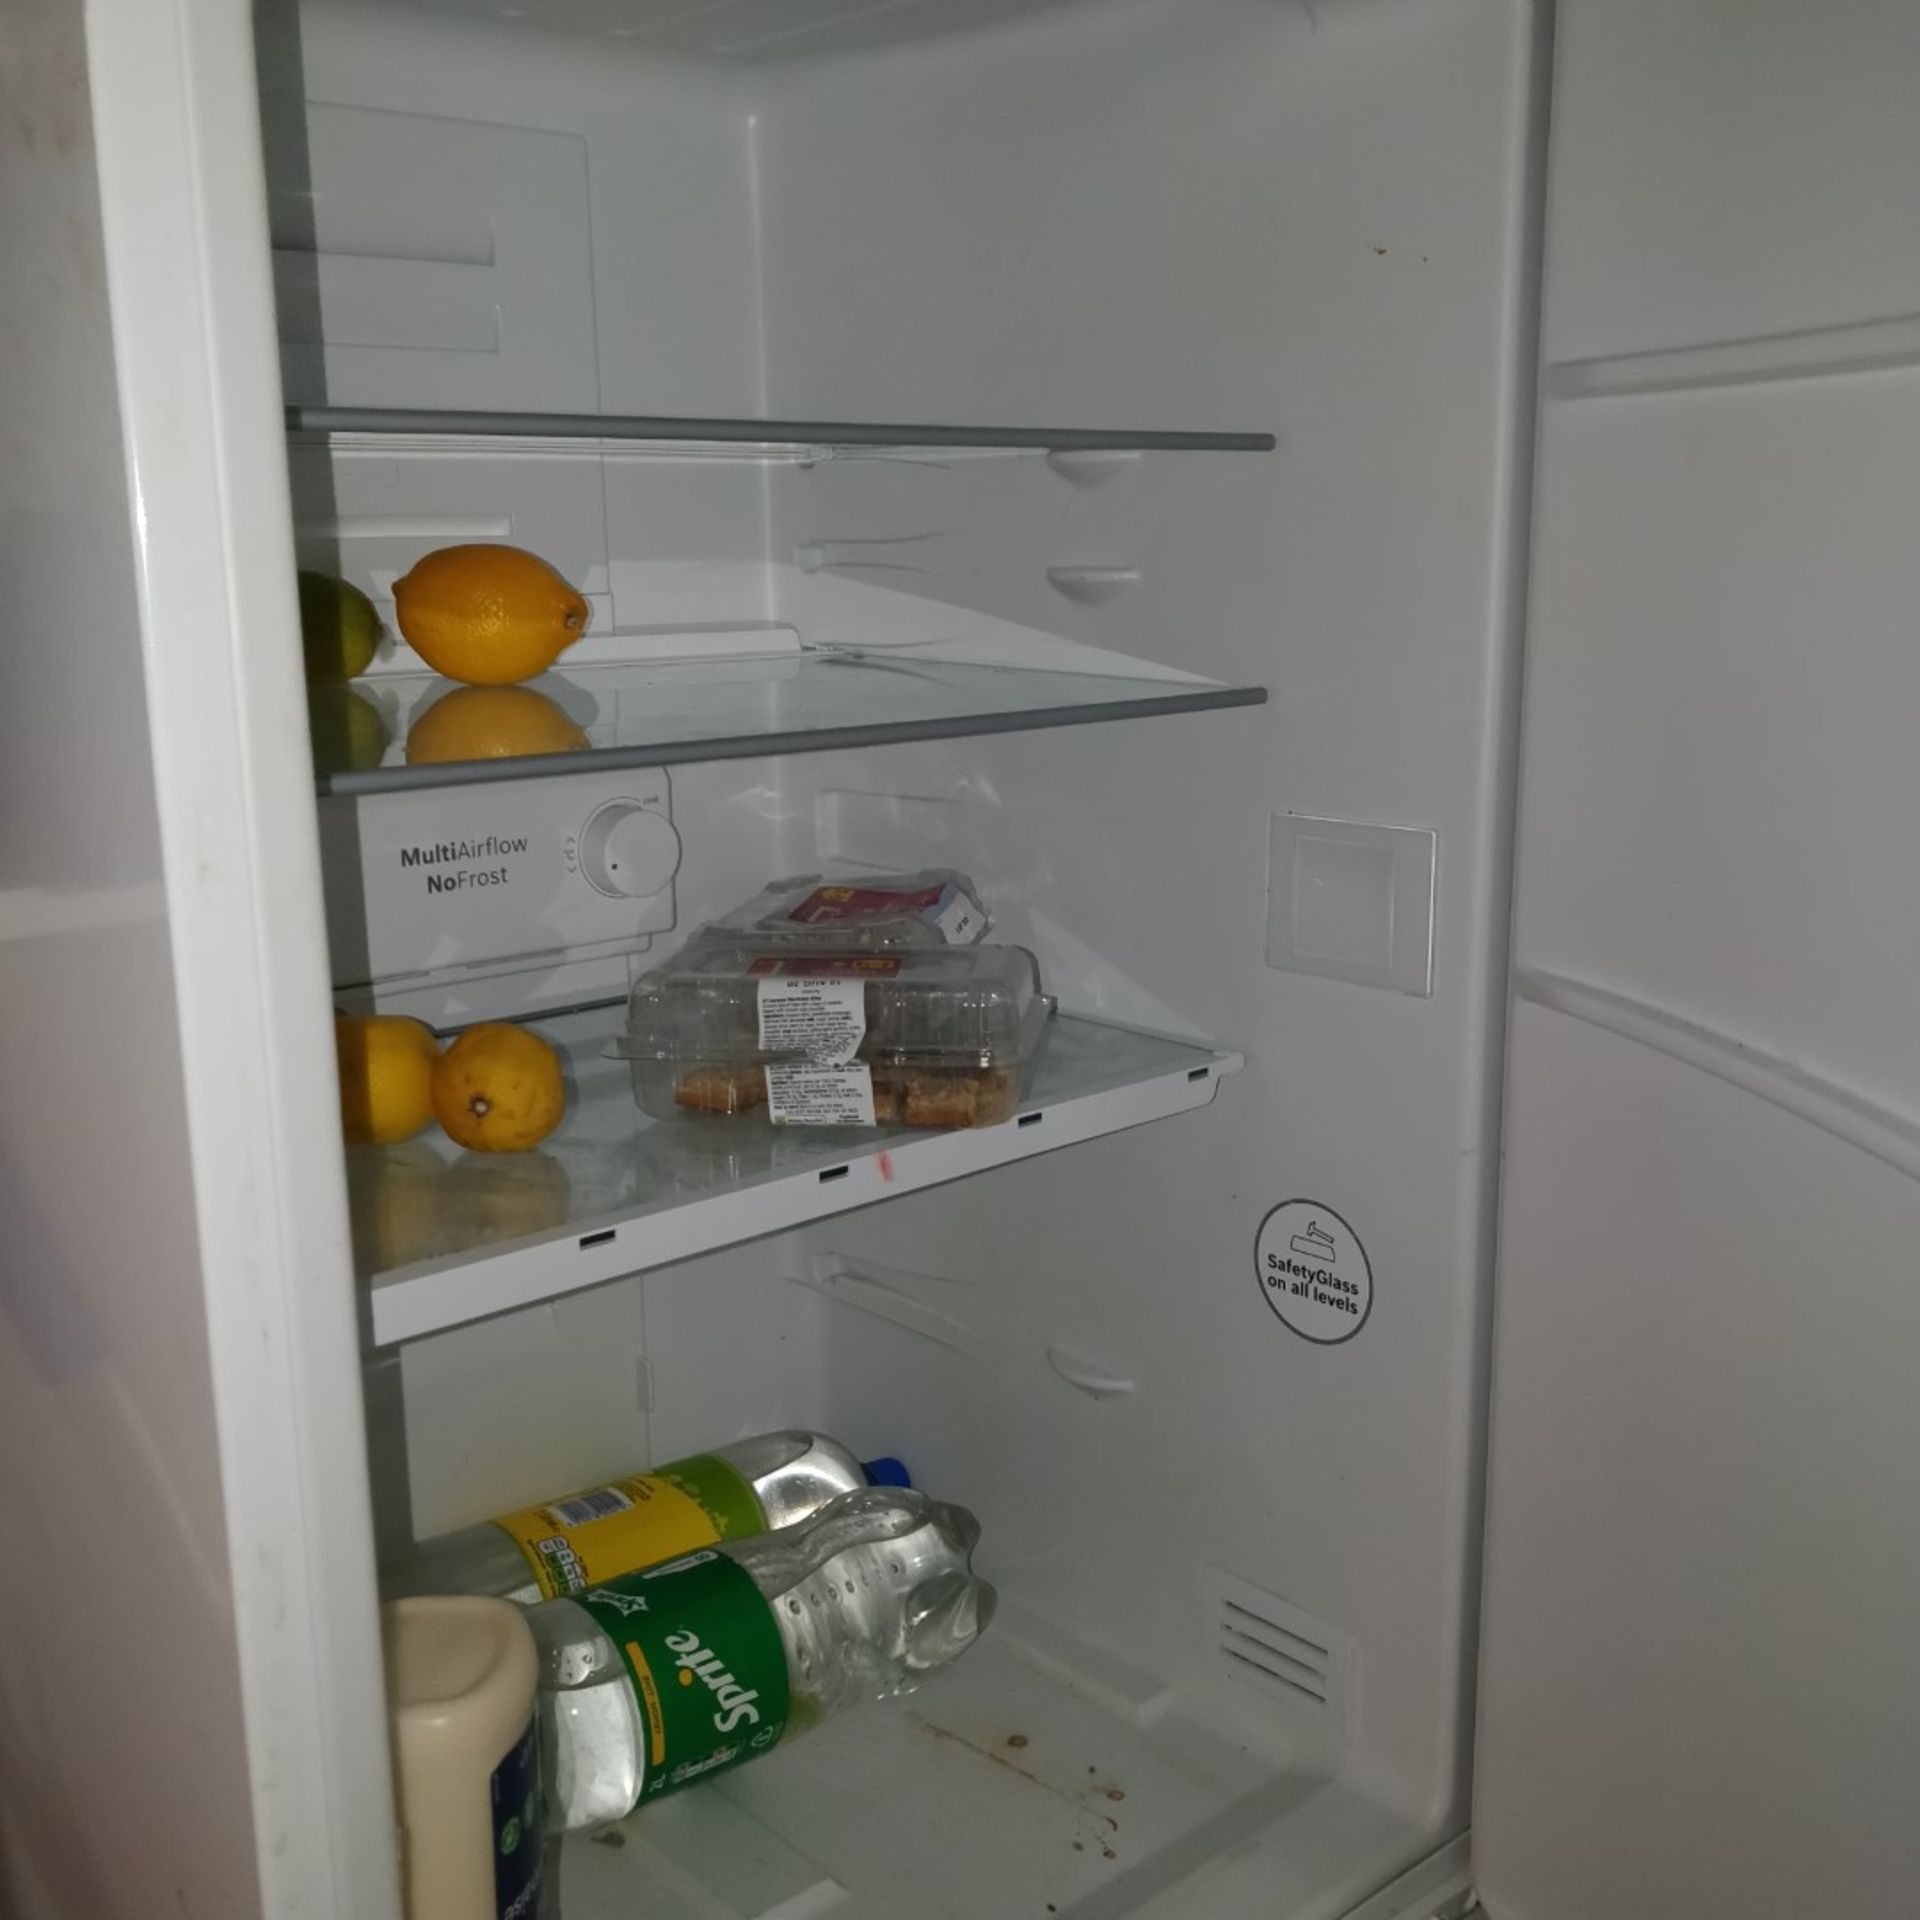 1 x Bosch Upright Fridge Freezer - CL586 - Location: Stockport SK1 This item is to be removed from a - Bild 4 aus 5